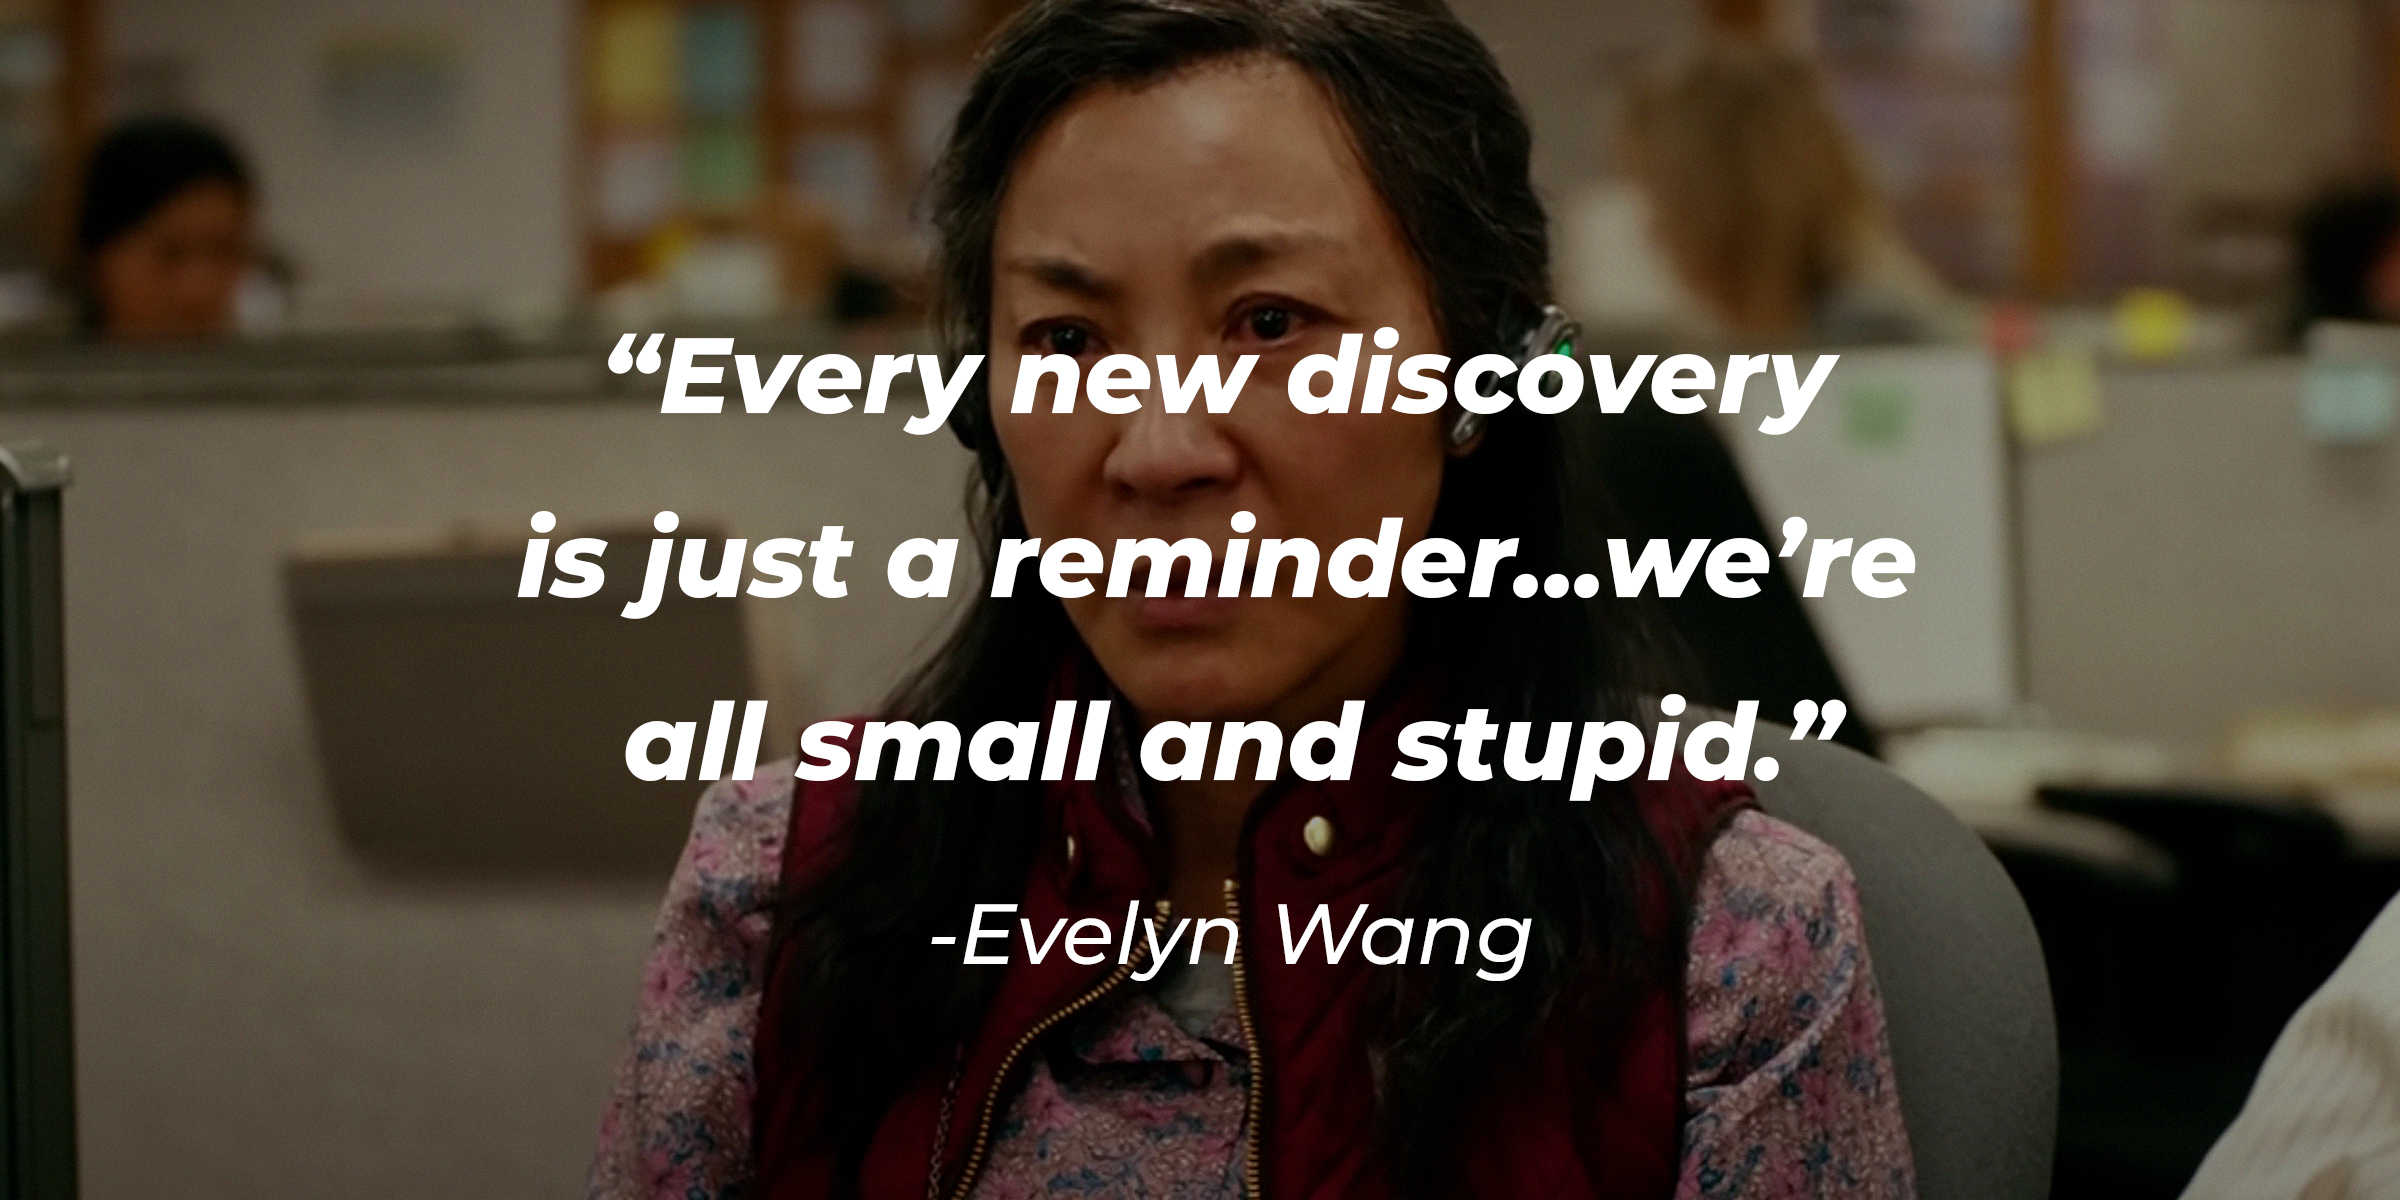 Evelyn Wang with her quote: “Every new discovery is just a reminder…we’re all small and stupid.” | Source: youtube.com/A24